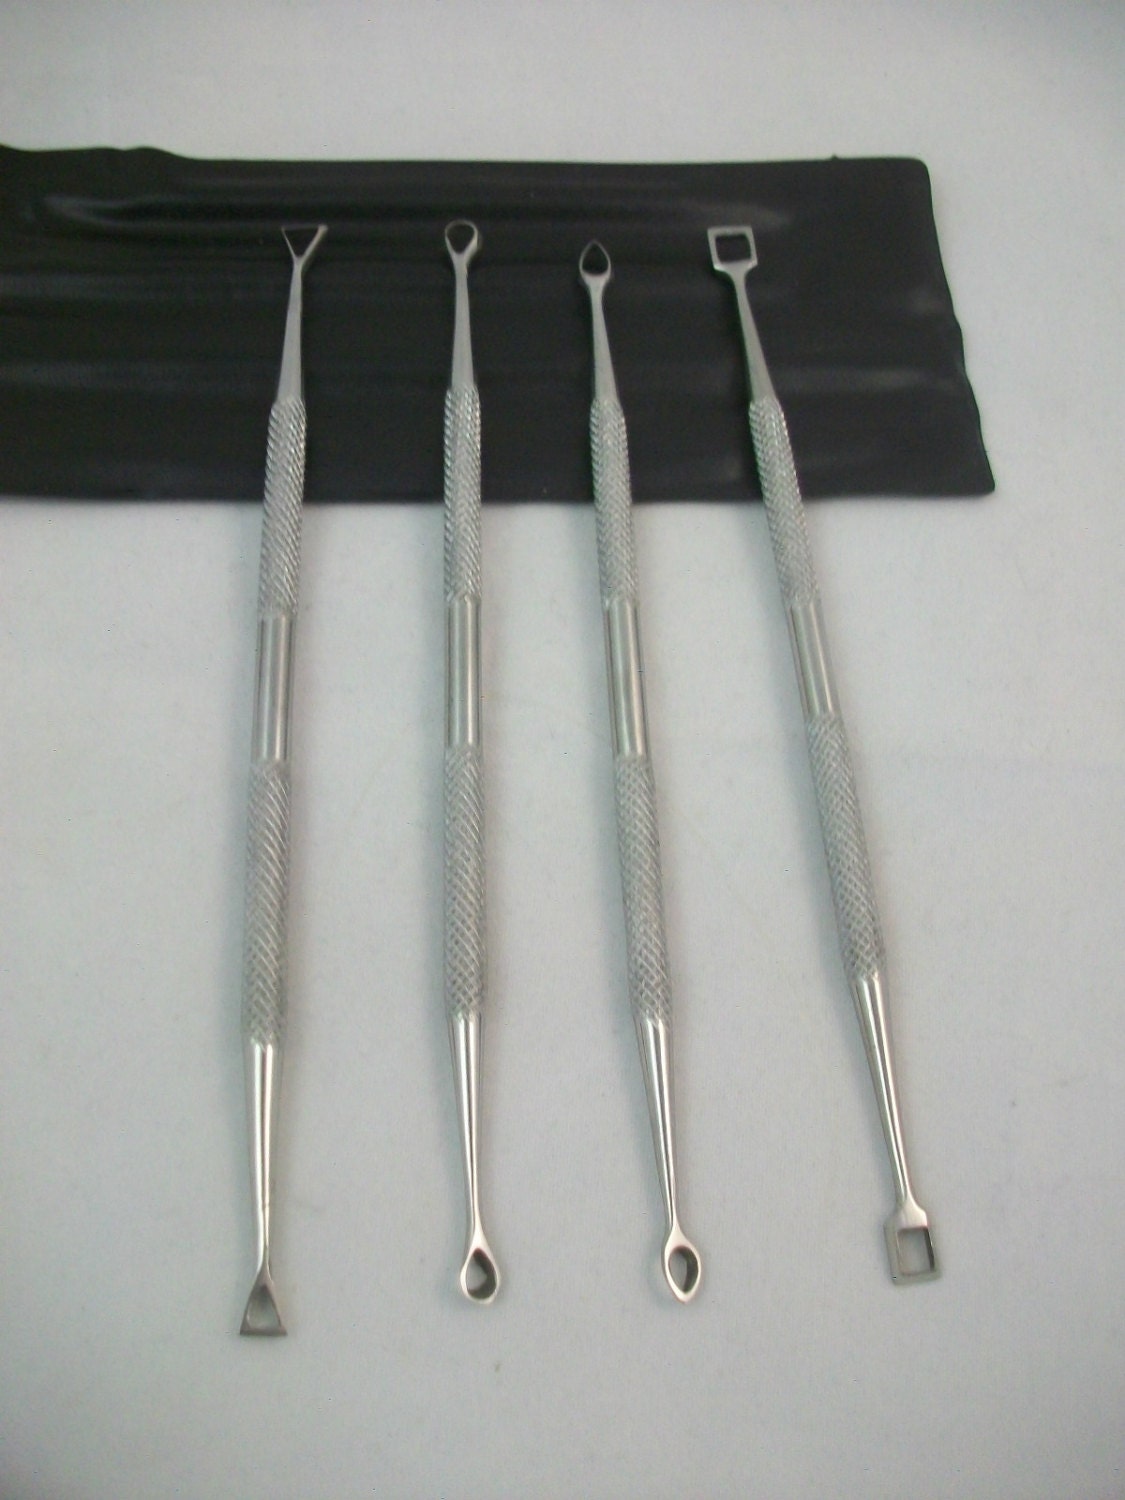 4-PC Wax Carving Tools Stainless Steel for CeramicsClayWax